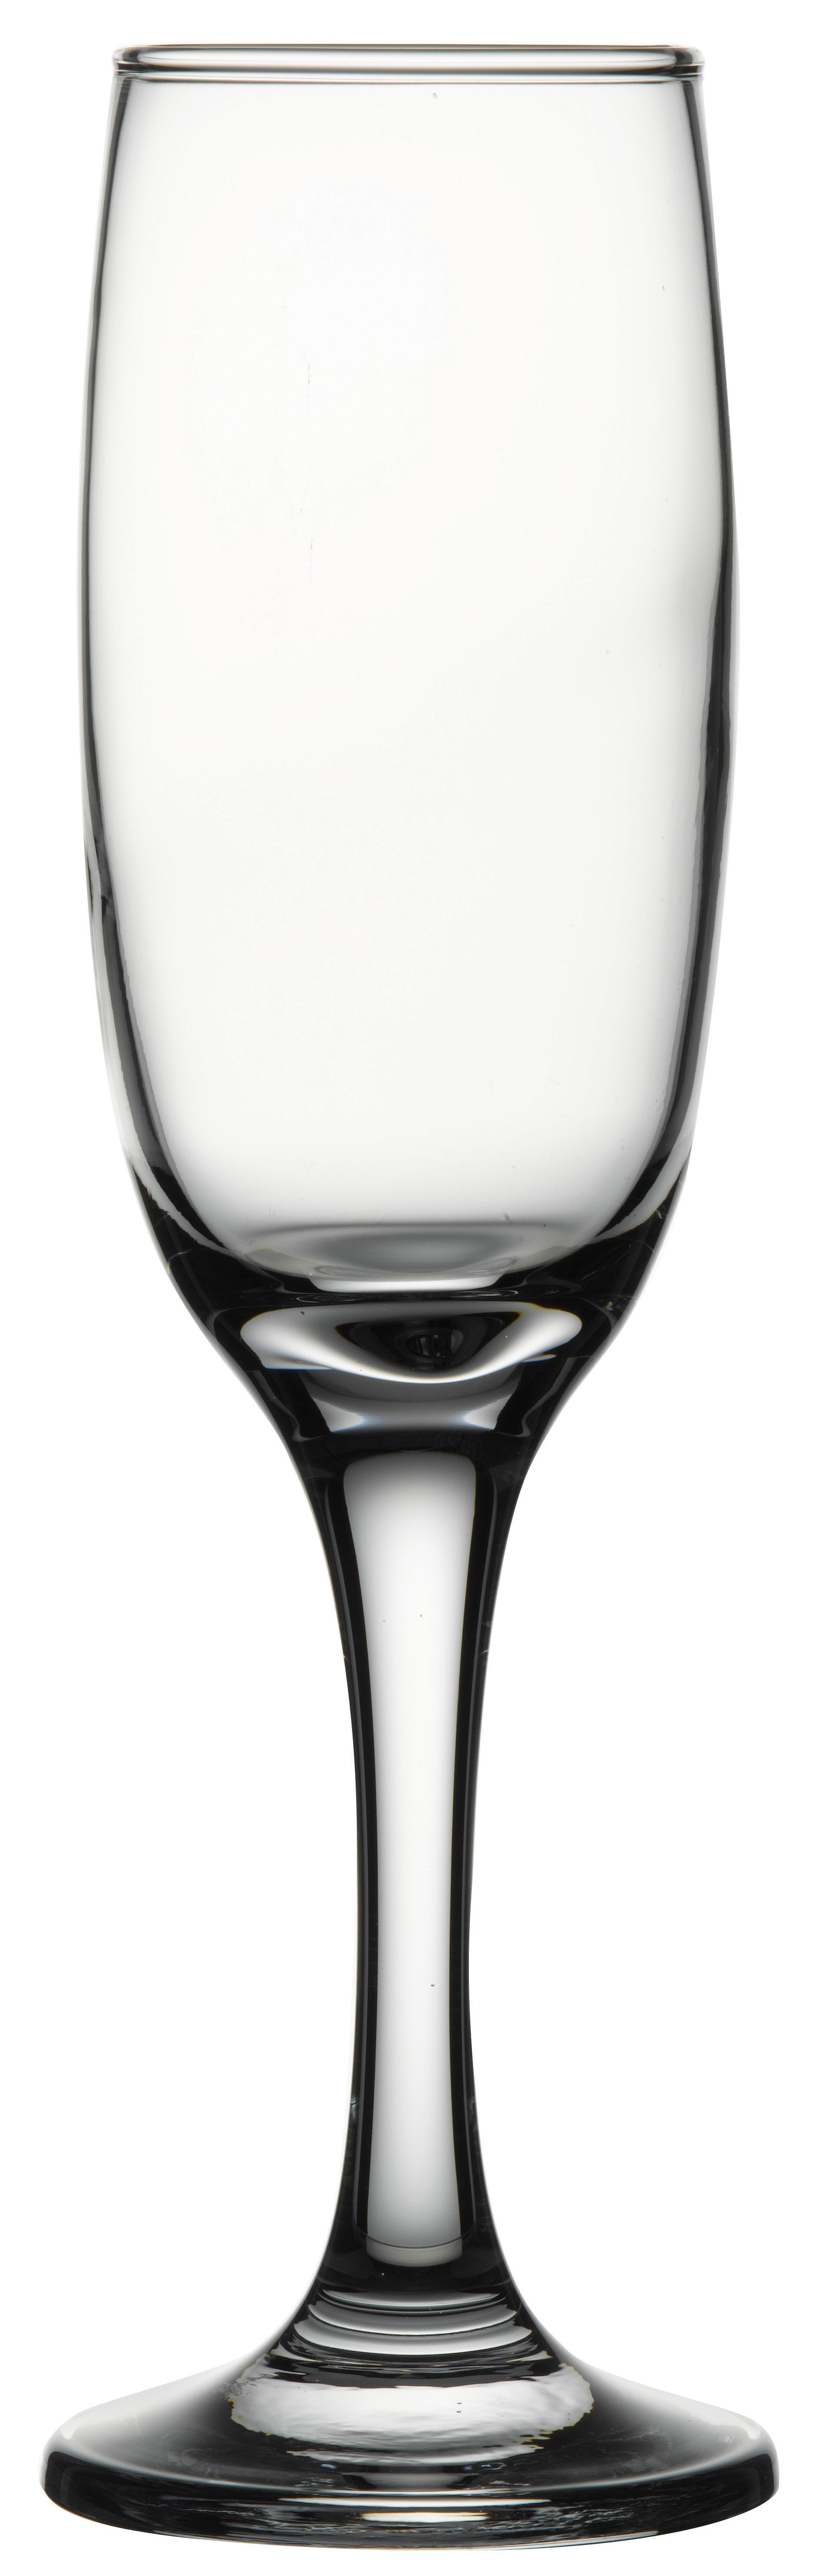 Pasabahce Imperial Champagne Flute Glass - 210ml